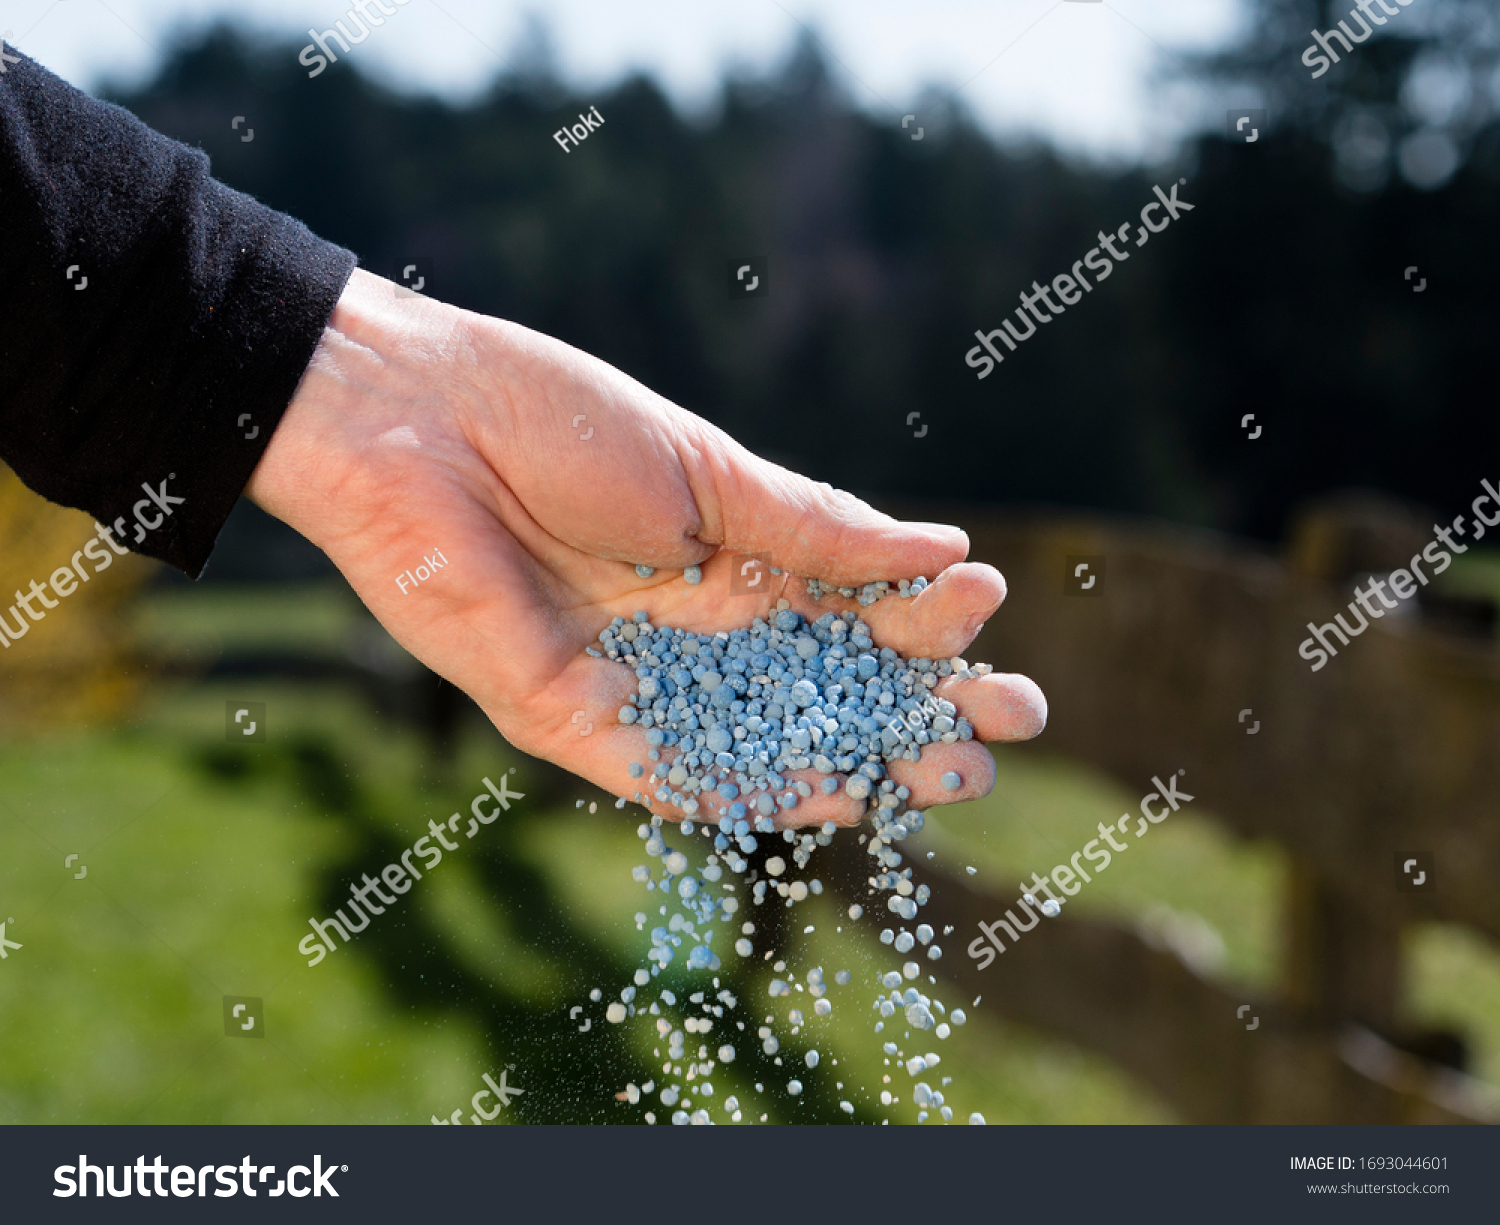 how to apply chemical fertilizer to plants in garden; hand holding and spreading chemical fertilizer or blue corn / blue fertilizer - how to fertilize your garden by hand using chemical fertilizer #1693044601